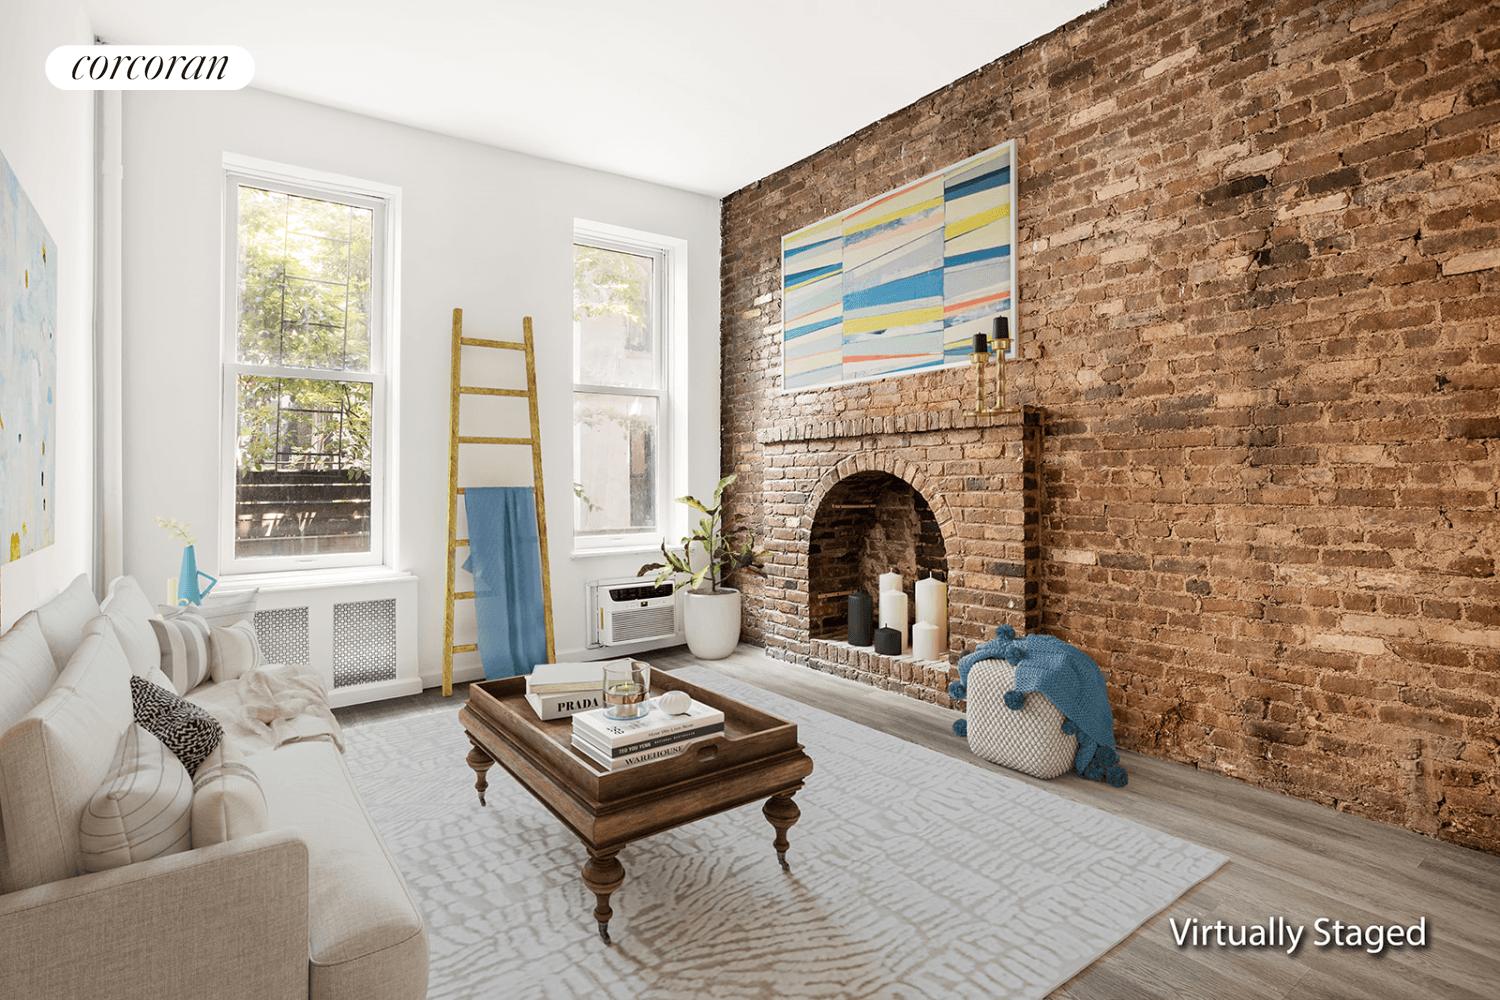 Located in the heart of Chelsea, in a charming pre war building, this home boasts ornamental details such as an exposed brick wall and a decorative fireplace.